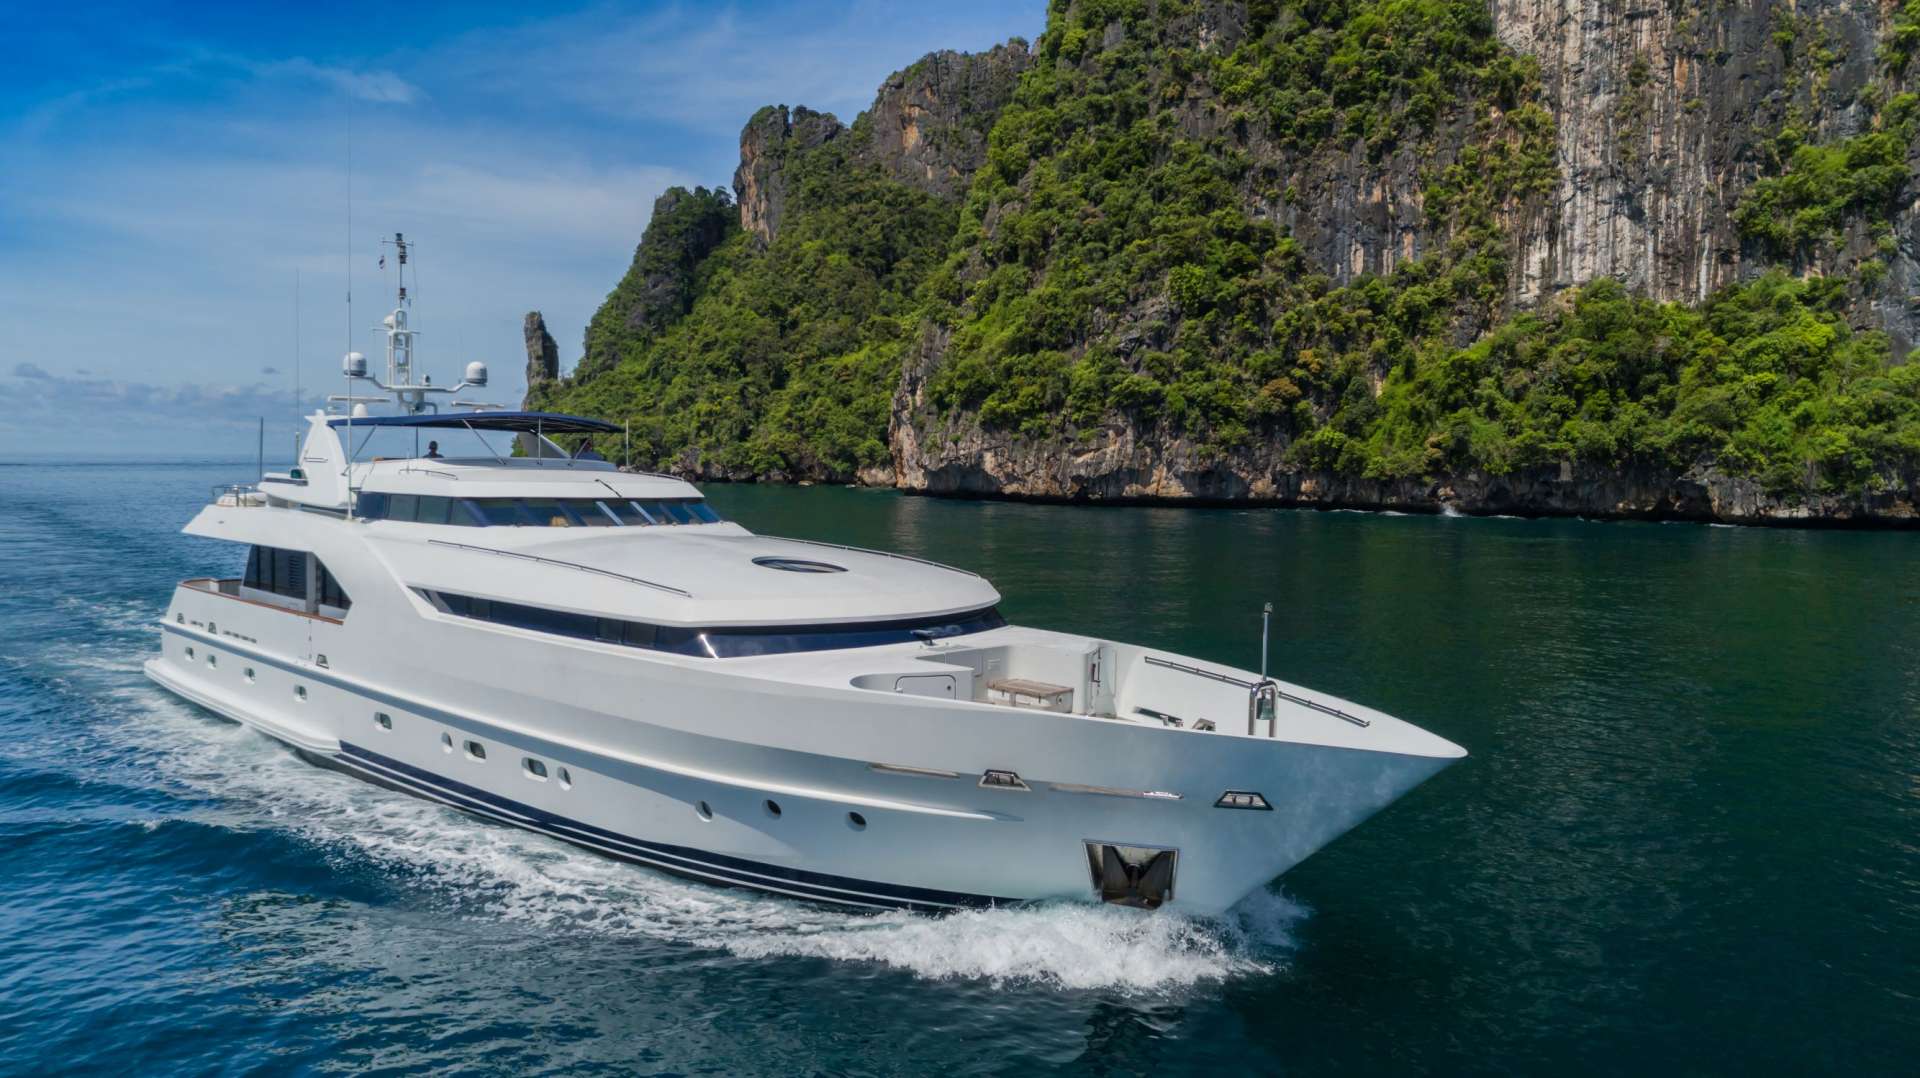 xanadu of london - Yacht Charter Philippines & Boat hire in SE Asia 1